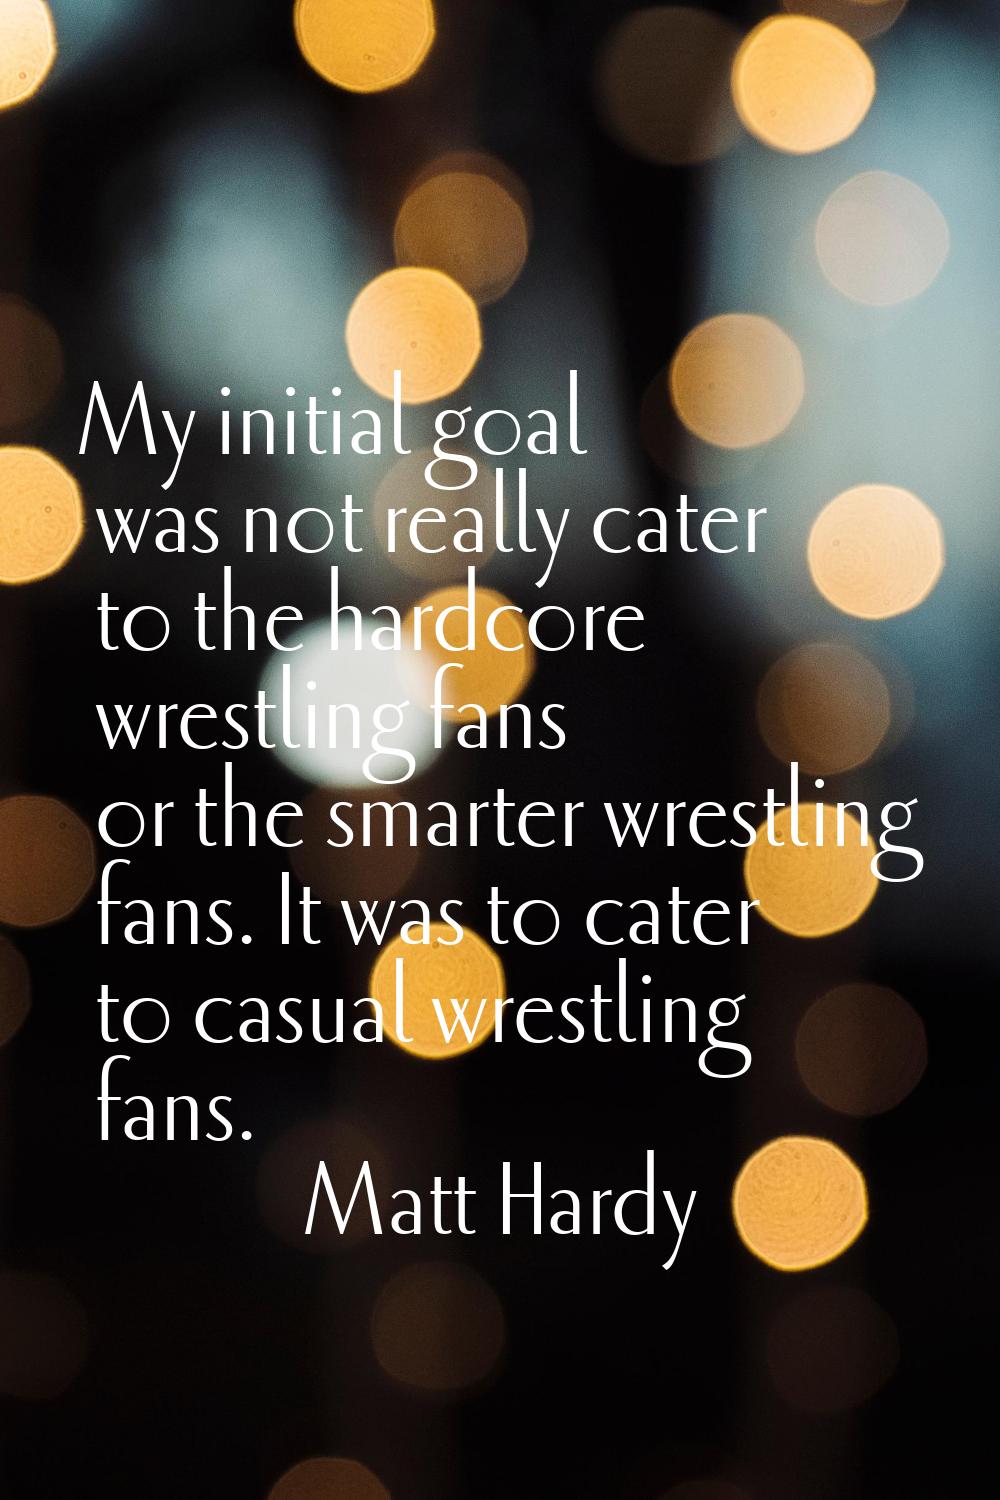 My initial goal was not really cater to the hardcore wrestling fans or the smarter wrestling fans. 